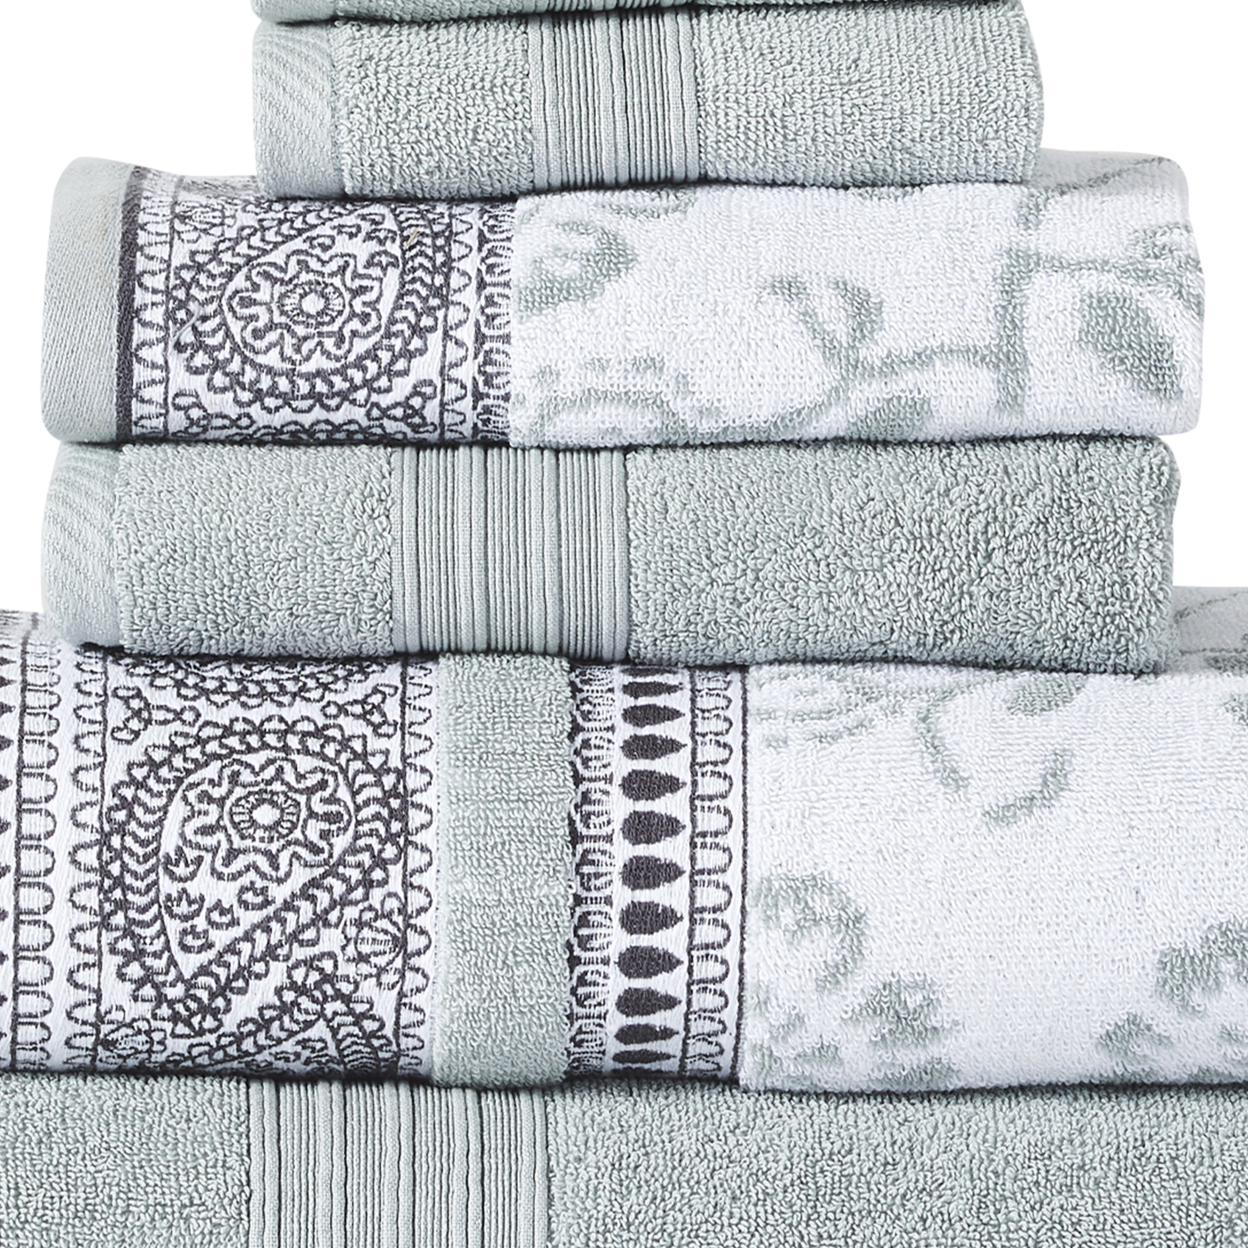 Veria 6 Piece Towel Set With Paisley And Floral Pattern The Urban Port, Sage Blue- Saltoro Sherpi